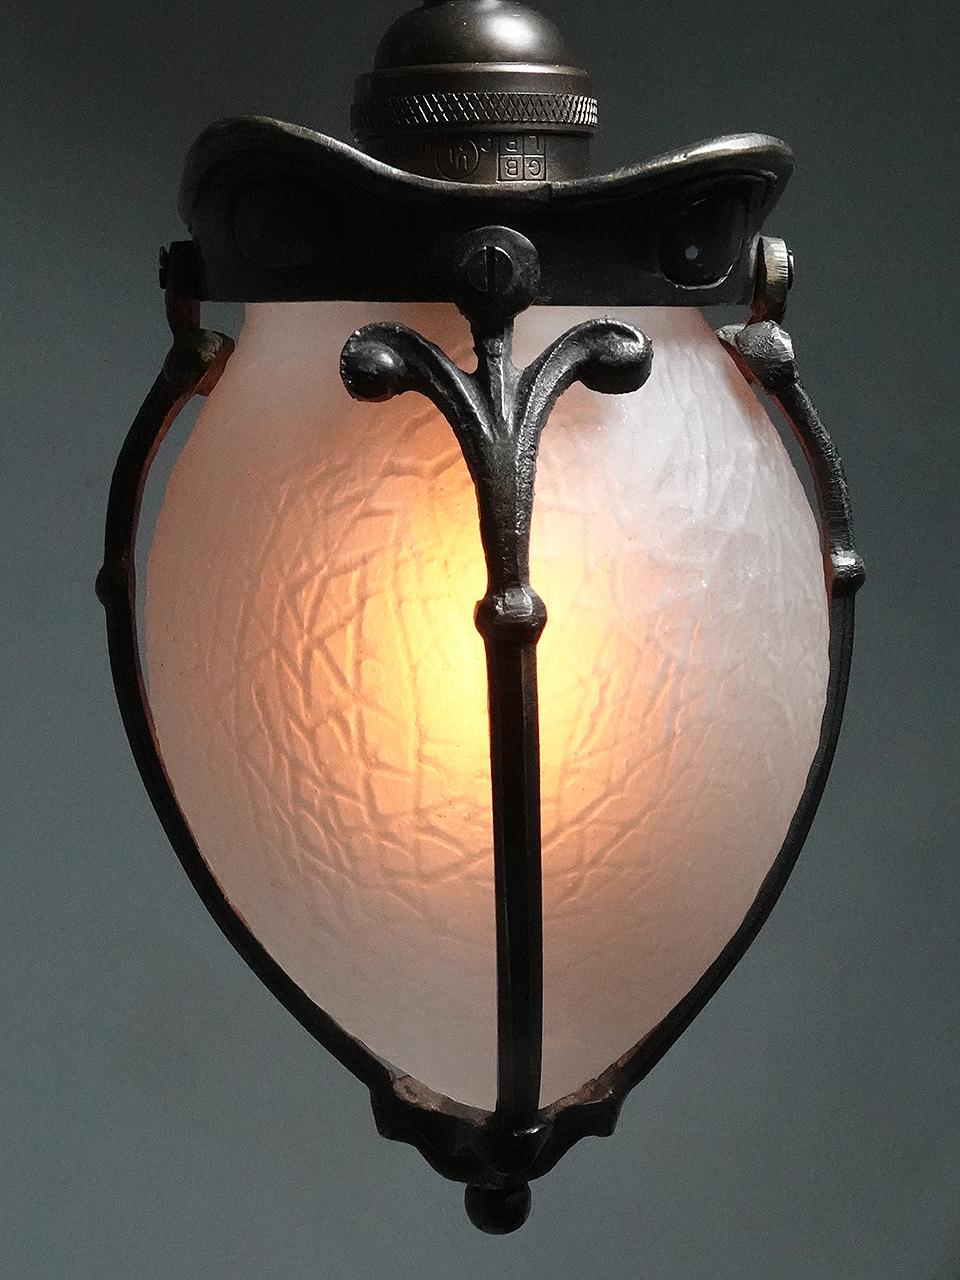 This is a petite matching pair of sconces. The glass has a frosted finish creating a nice warm glow and no bulb glair. The glass also has a unique stone patterned texture.